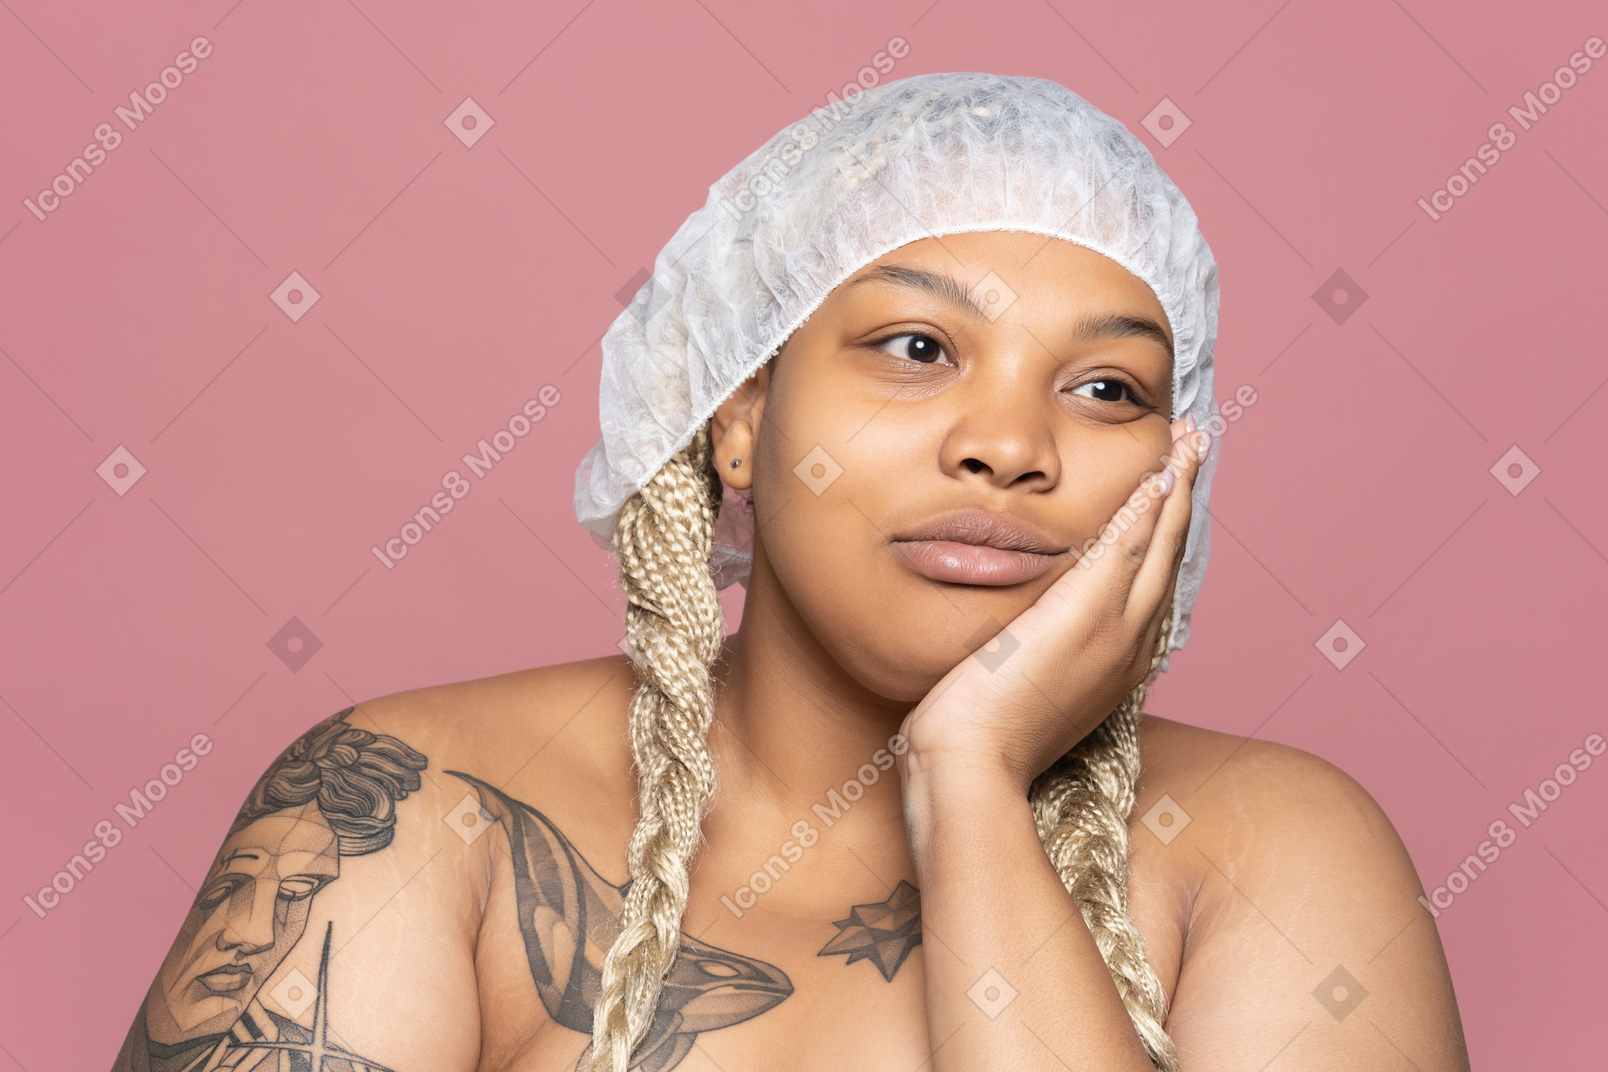 Blond woman waiting for a beauty procedure